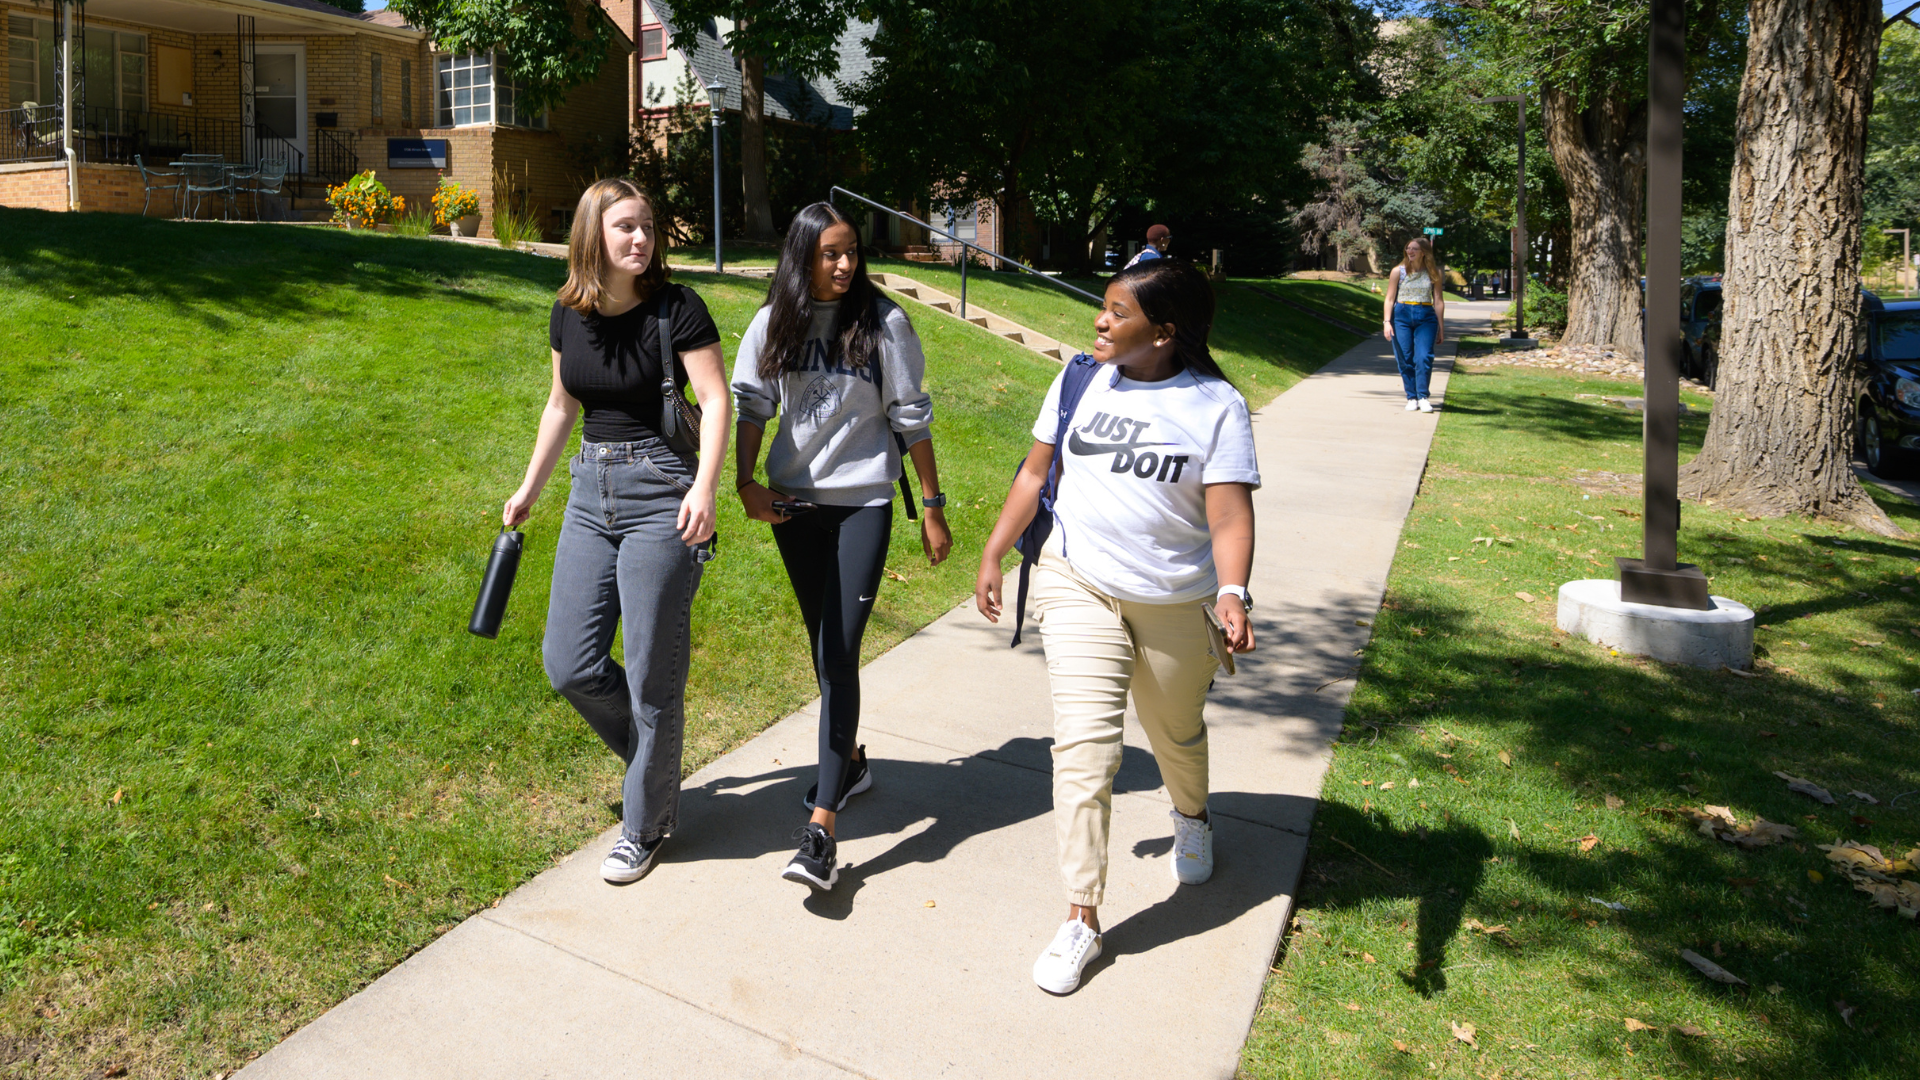 Students talk while walking down Illinois St on campus